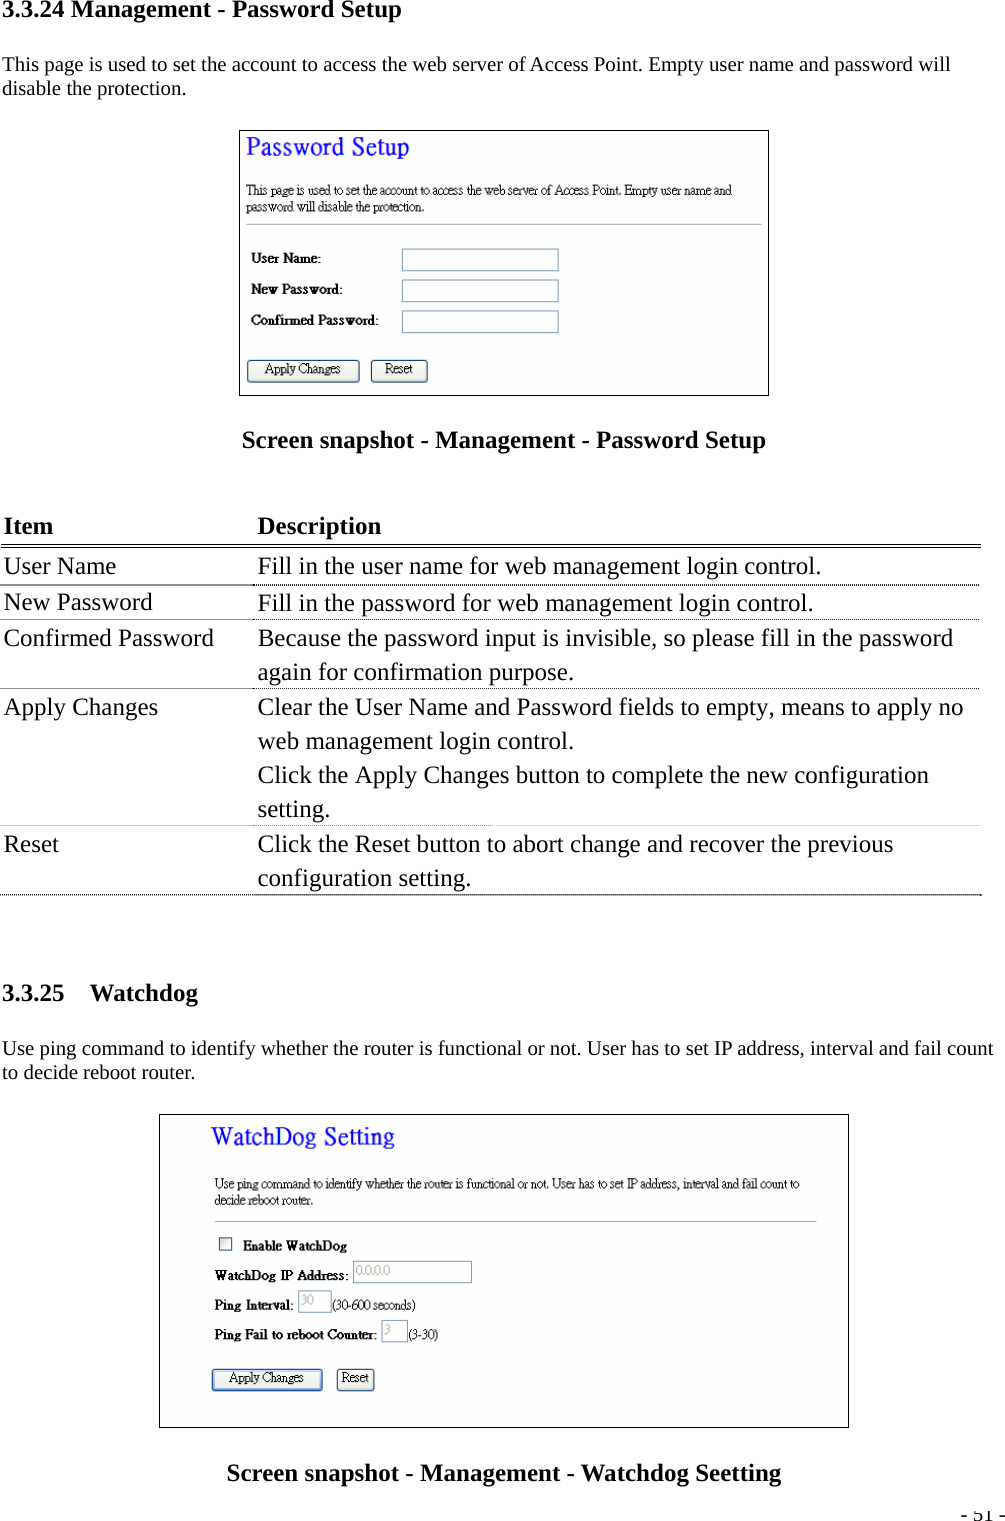 3.3.24 Management - Password Setup This page is used to set the account to access the web server of Access Point. Empty user name and password will disable the protection.  Screen snapshot - Management - Password Setup  Item Description User Name    Fill in the user name for web management login control. New Password  Fill in the password for web management login control. Confirmed Password    Because the password input is invisible, so please fill in the password again for confirmation purpose. Apply Changes  Clear the User Name and Password fields to empty, means to apply no web management login control. Click the Apply Changes button to complete the new configuration setting. Reset  Click the Reset button to abort change and recover the previous configuration setting.  3.3.25  Watchdog Use ping command to identify whether the router is functional or not. User has to set IP address, interval and fail count to decide reboot router.   - 51 -Screen snapshot - Management - Watchdog Seetting 